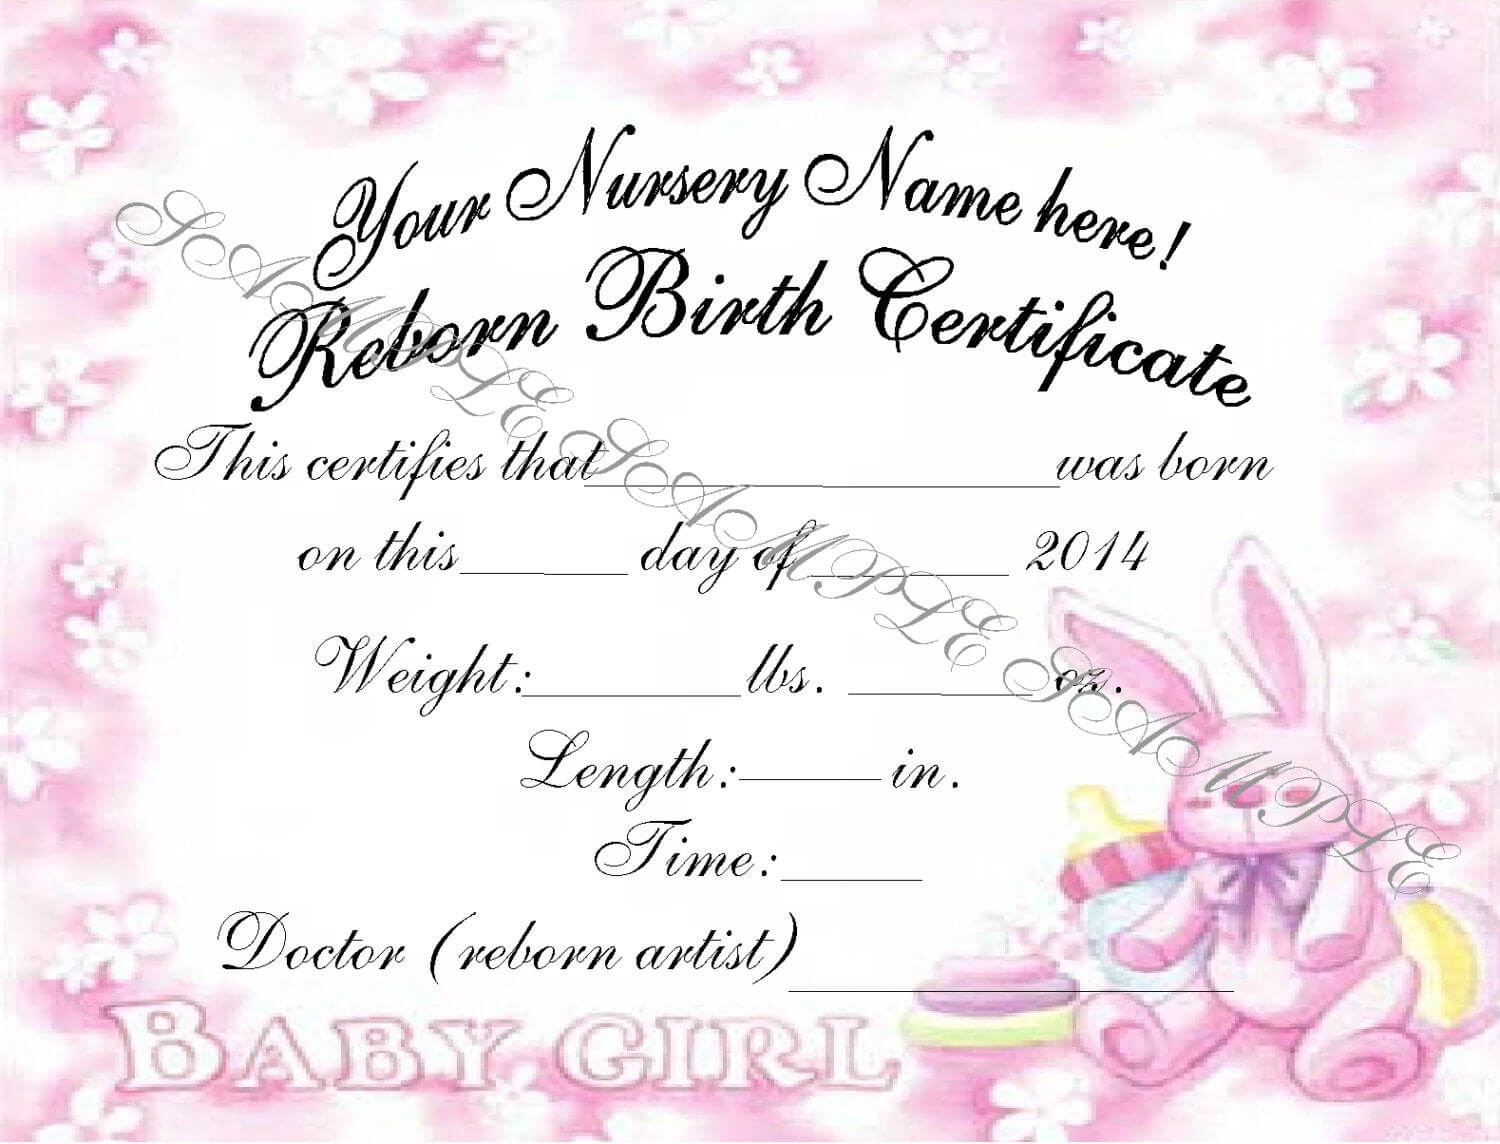 Baby Girl Birth Certificate Template Videotekaalex Tk With Regard To Baby Doll Birth Certificate Template